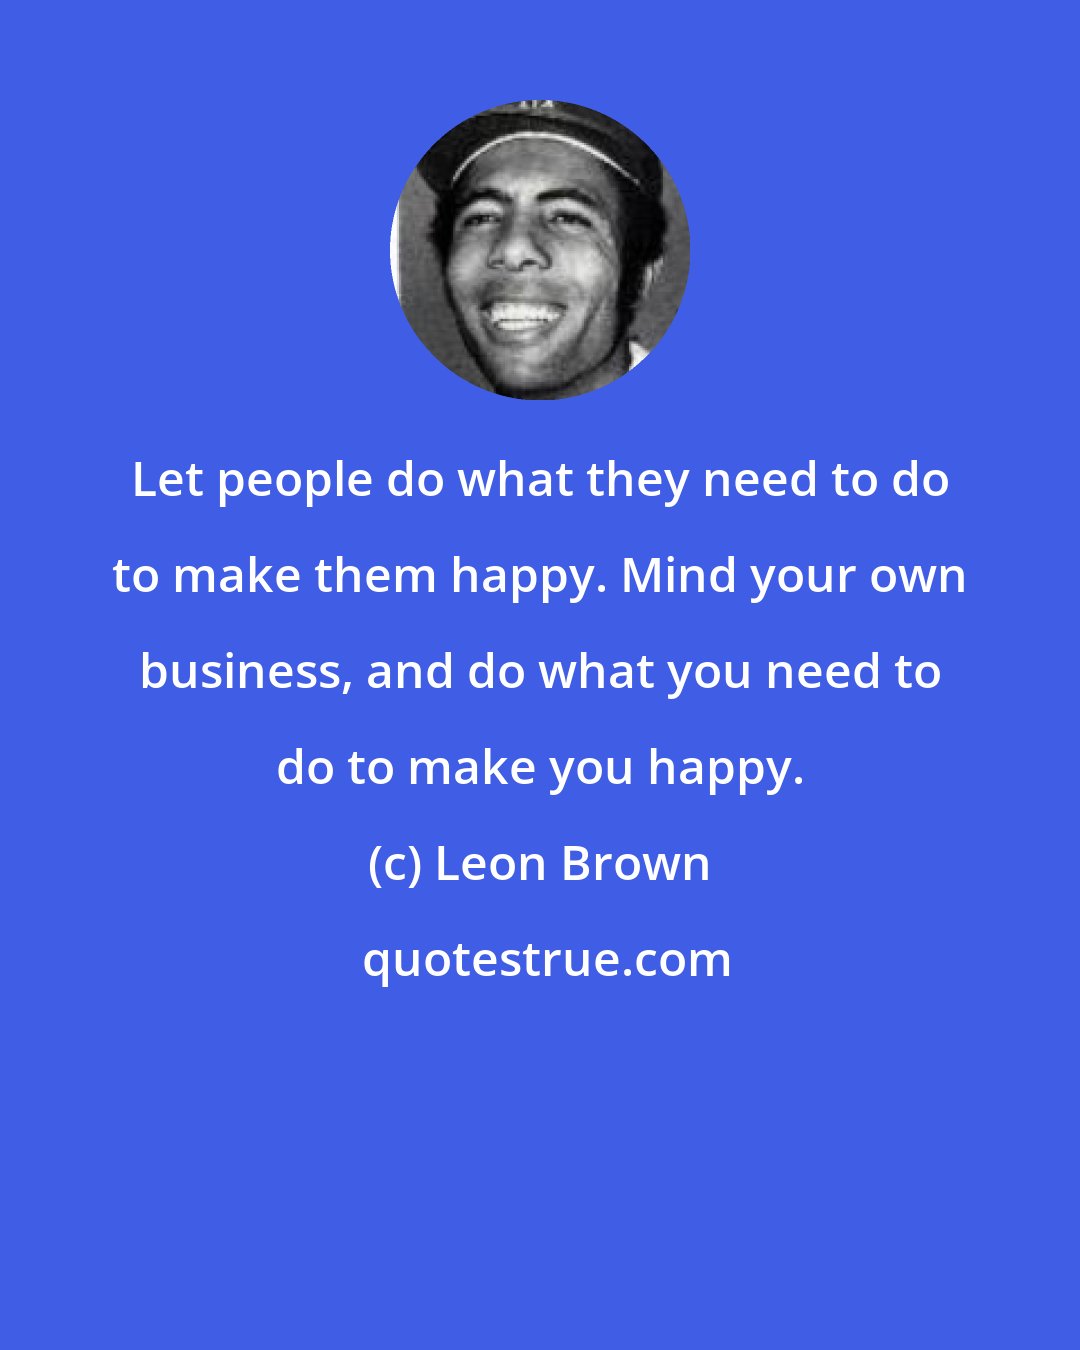 Leon Brown: Let people do what they need to do to make them happy. Mind your own business, and do what you need to do to make you happy.